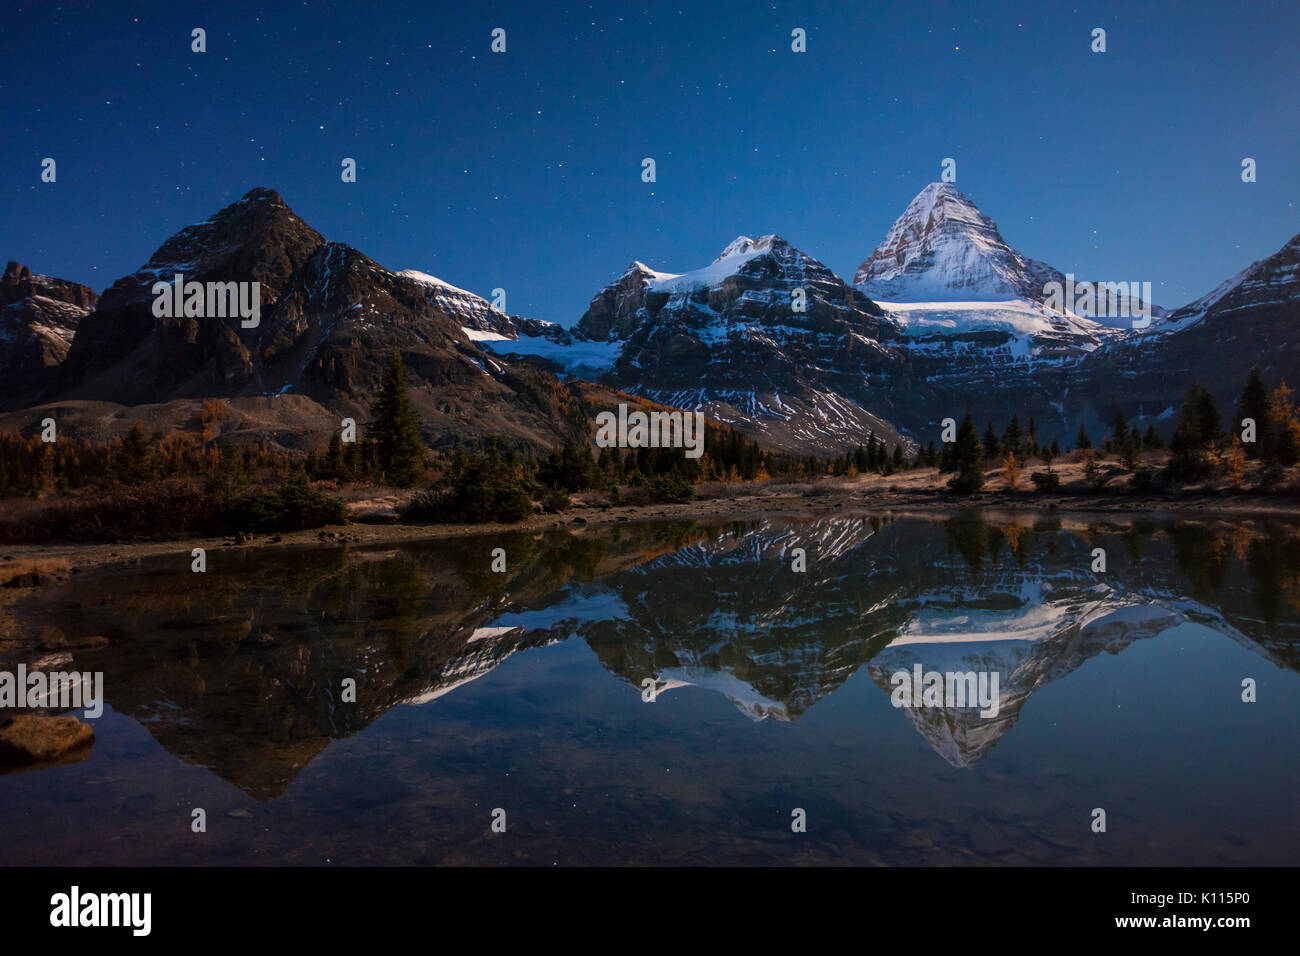 Mount Assiniboine and a star-filled sky reflected in a tarn near Lake Magog, Mount Assiniboine Provincial Park, Rocky Mountains, British Columbia, Can Stock Photo